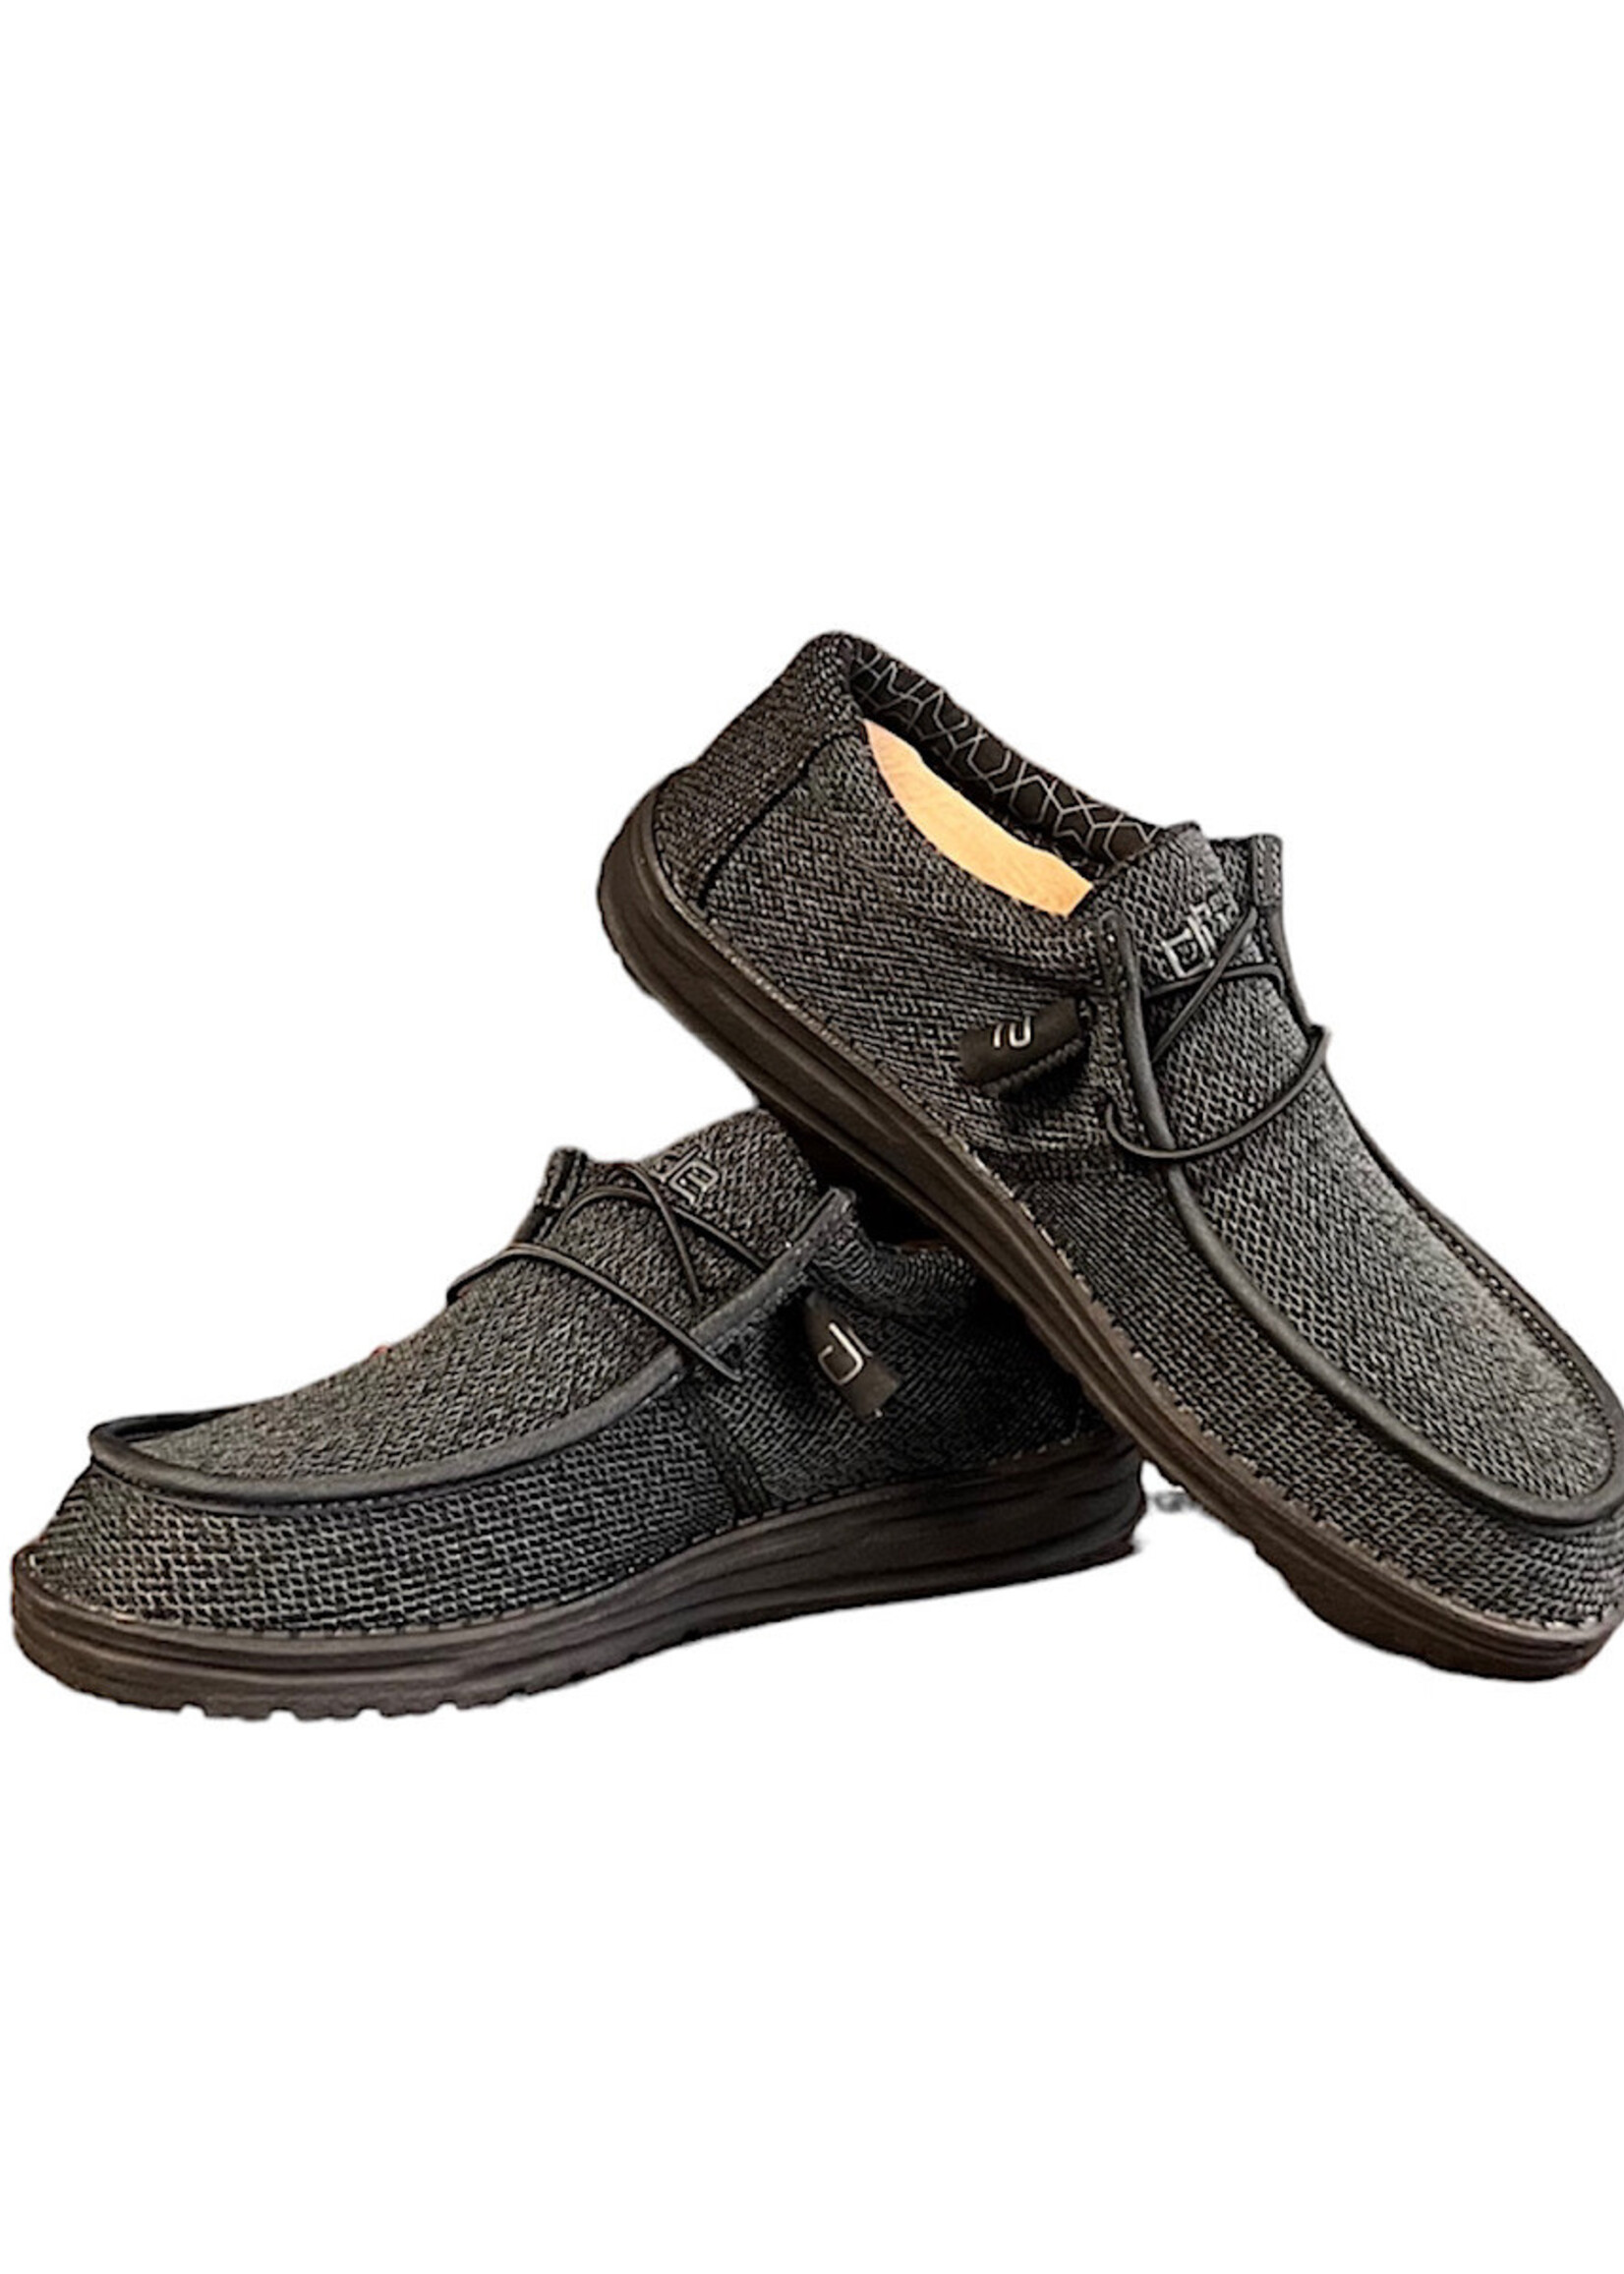 Hey Dude Wally Sox Micro Total Black - Main Street Boutique